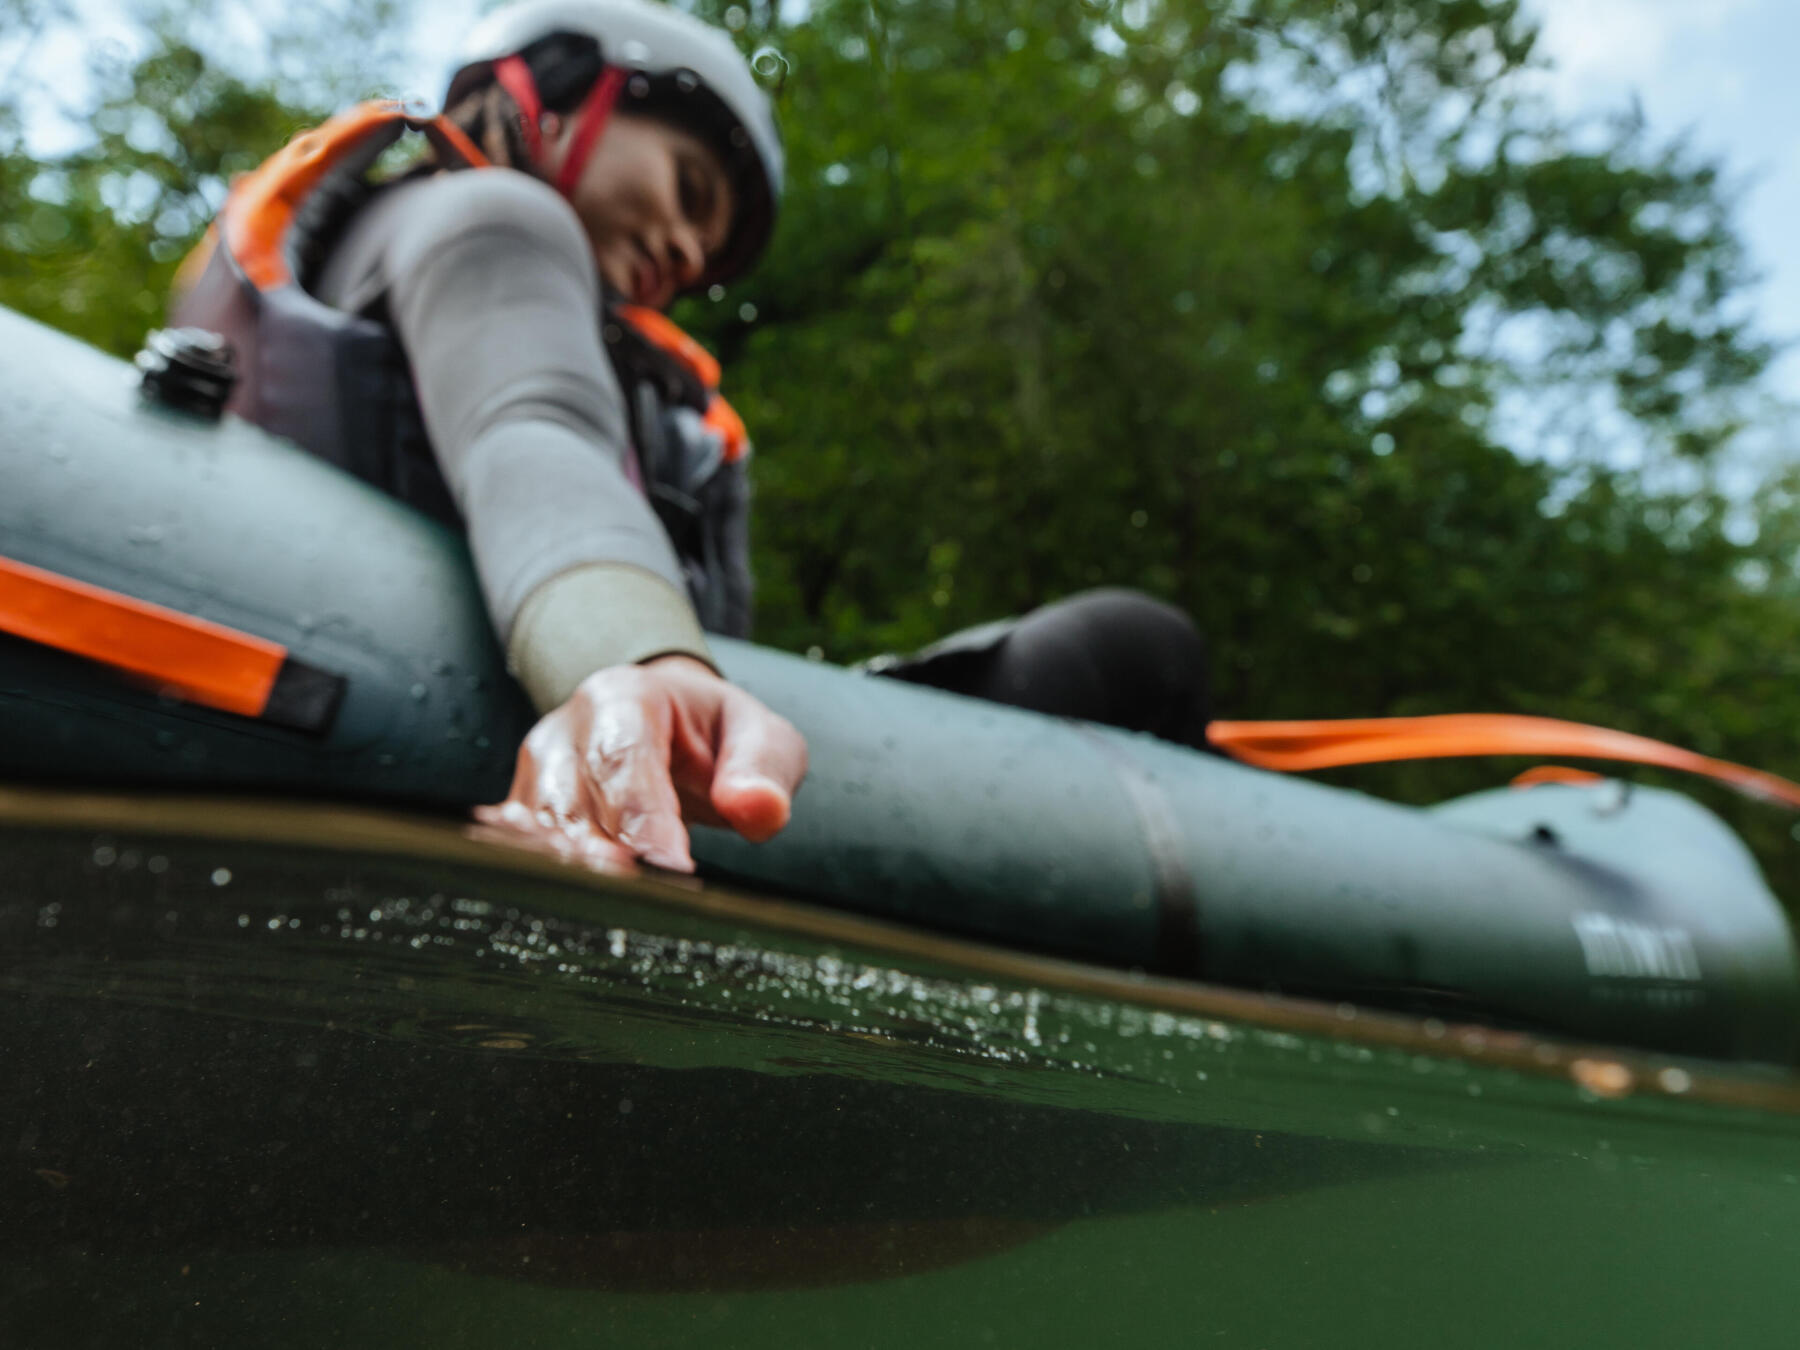 How to get started with packrafting